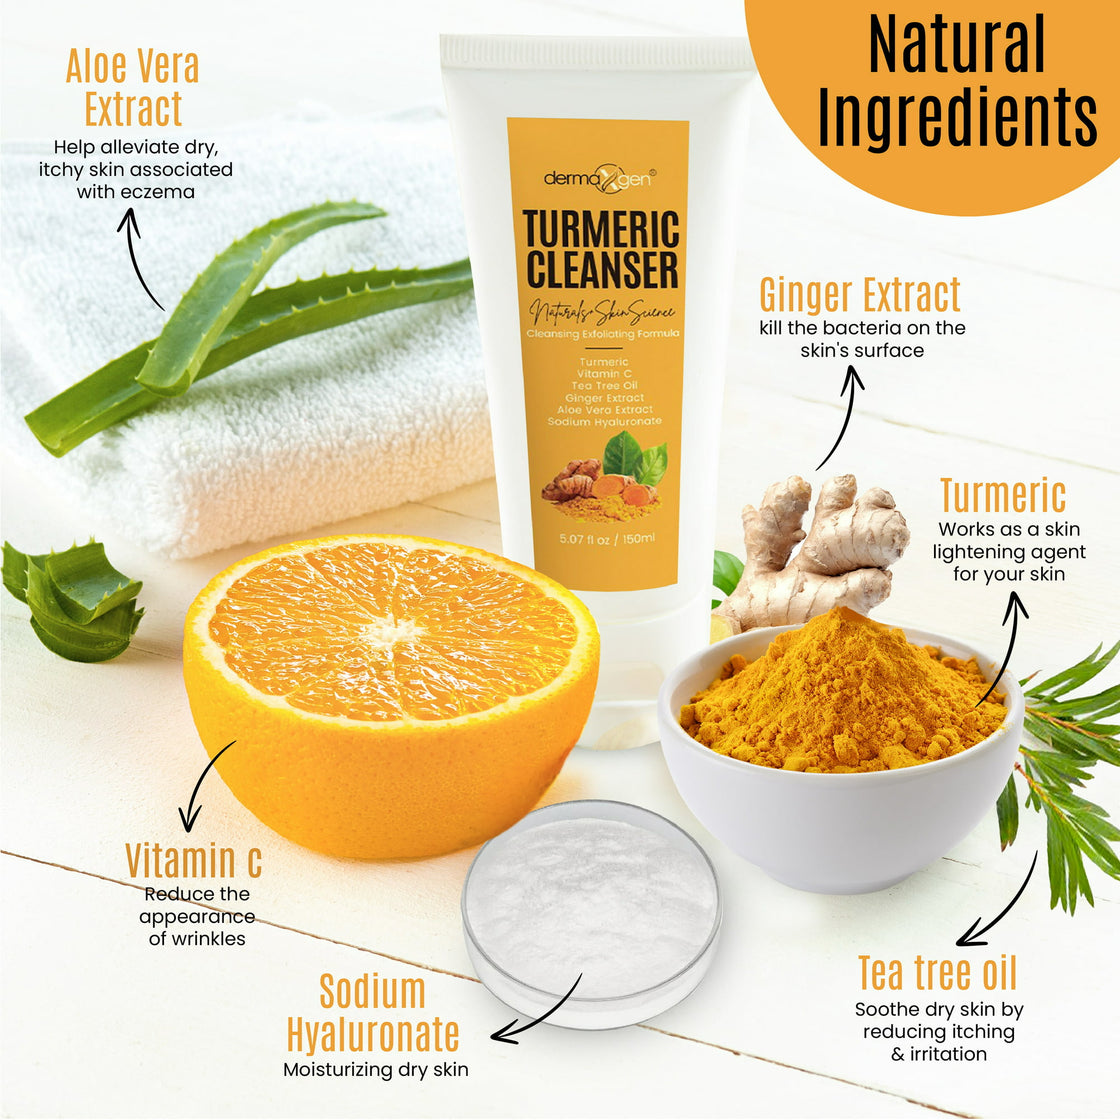 Dermaxgen Turmeric Facial Cleanser, 5 oz - 100% Natural Anti Aging Exfoliating, Nourish & Glowing Turmeric Cleanser for Clearing Acne Scars, Age Spots, Sun Damage, Discoloration